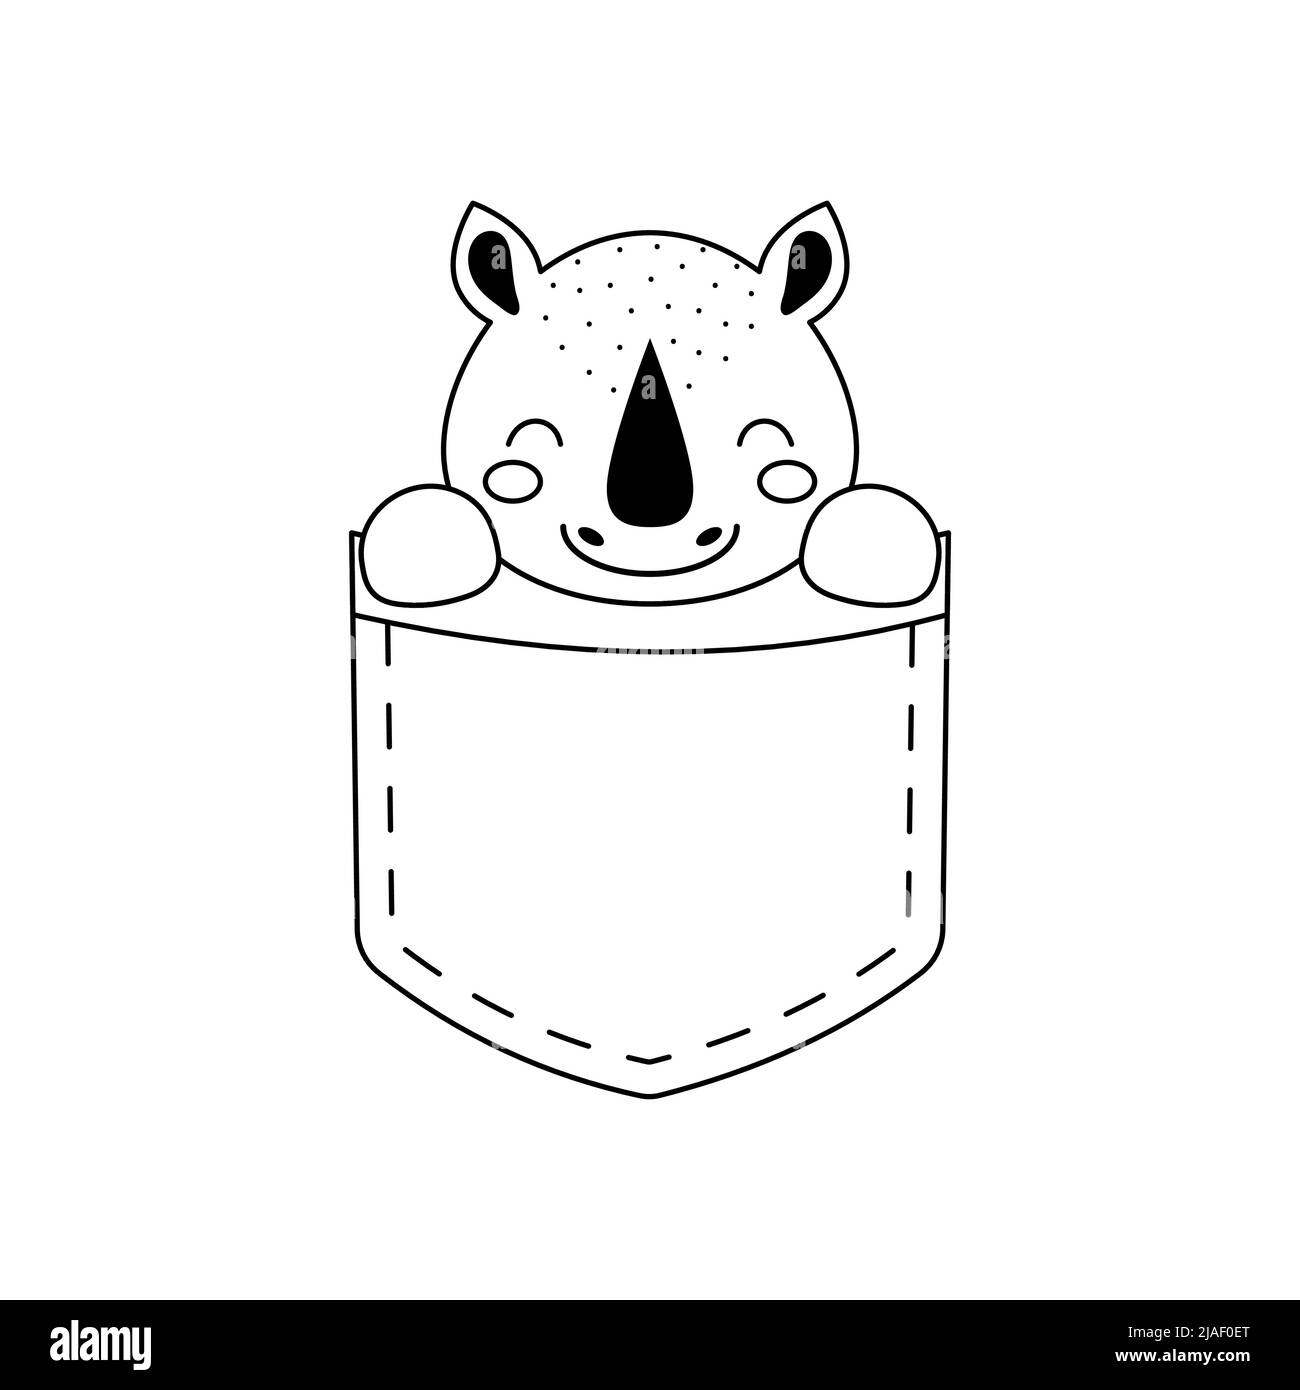 Cute rhino sitting in pocket. Animal face in Scandinavian style for kids t-shirts, wear, nursery decoration, greeting cards, invitations, poster, hous Stock Vector